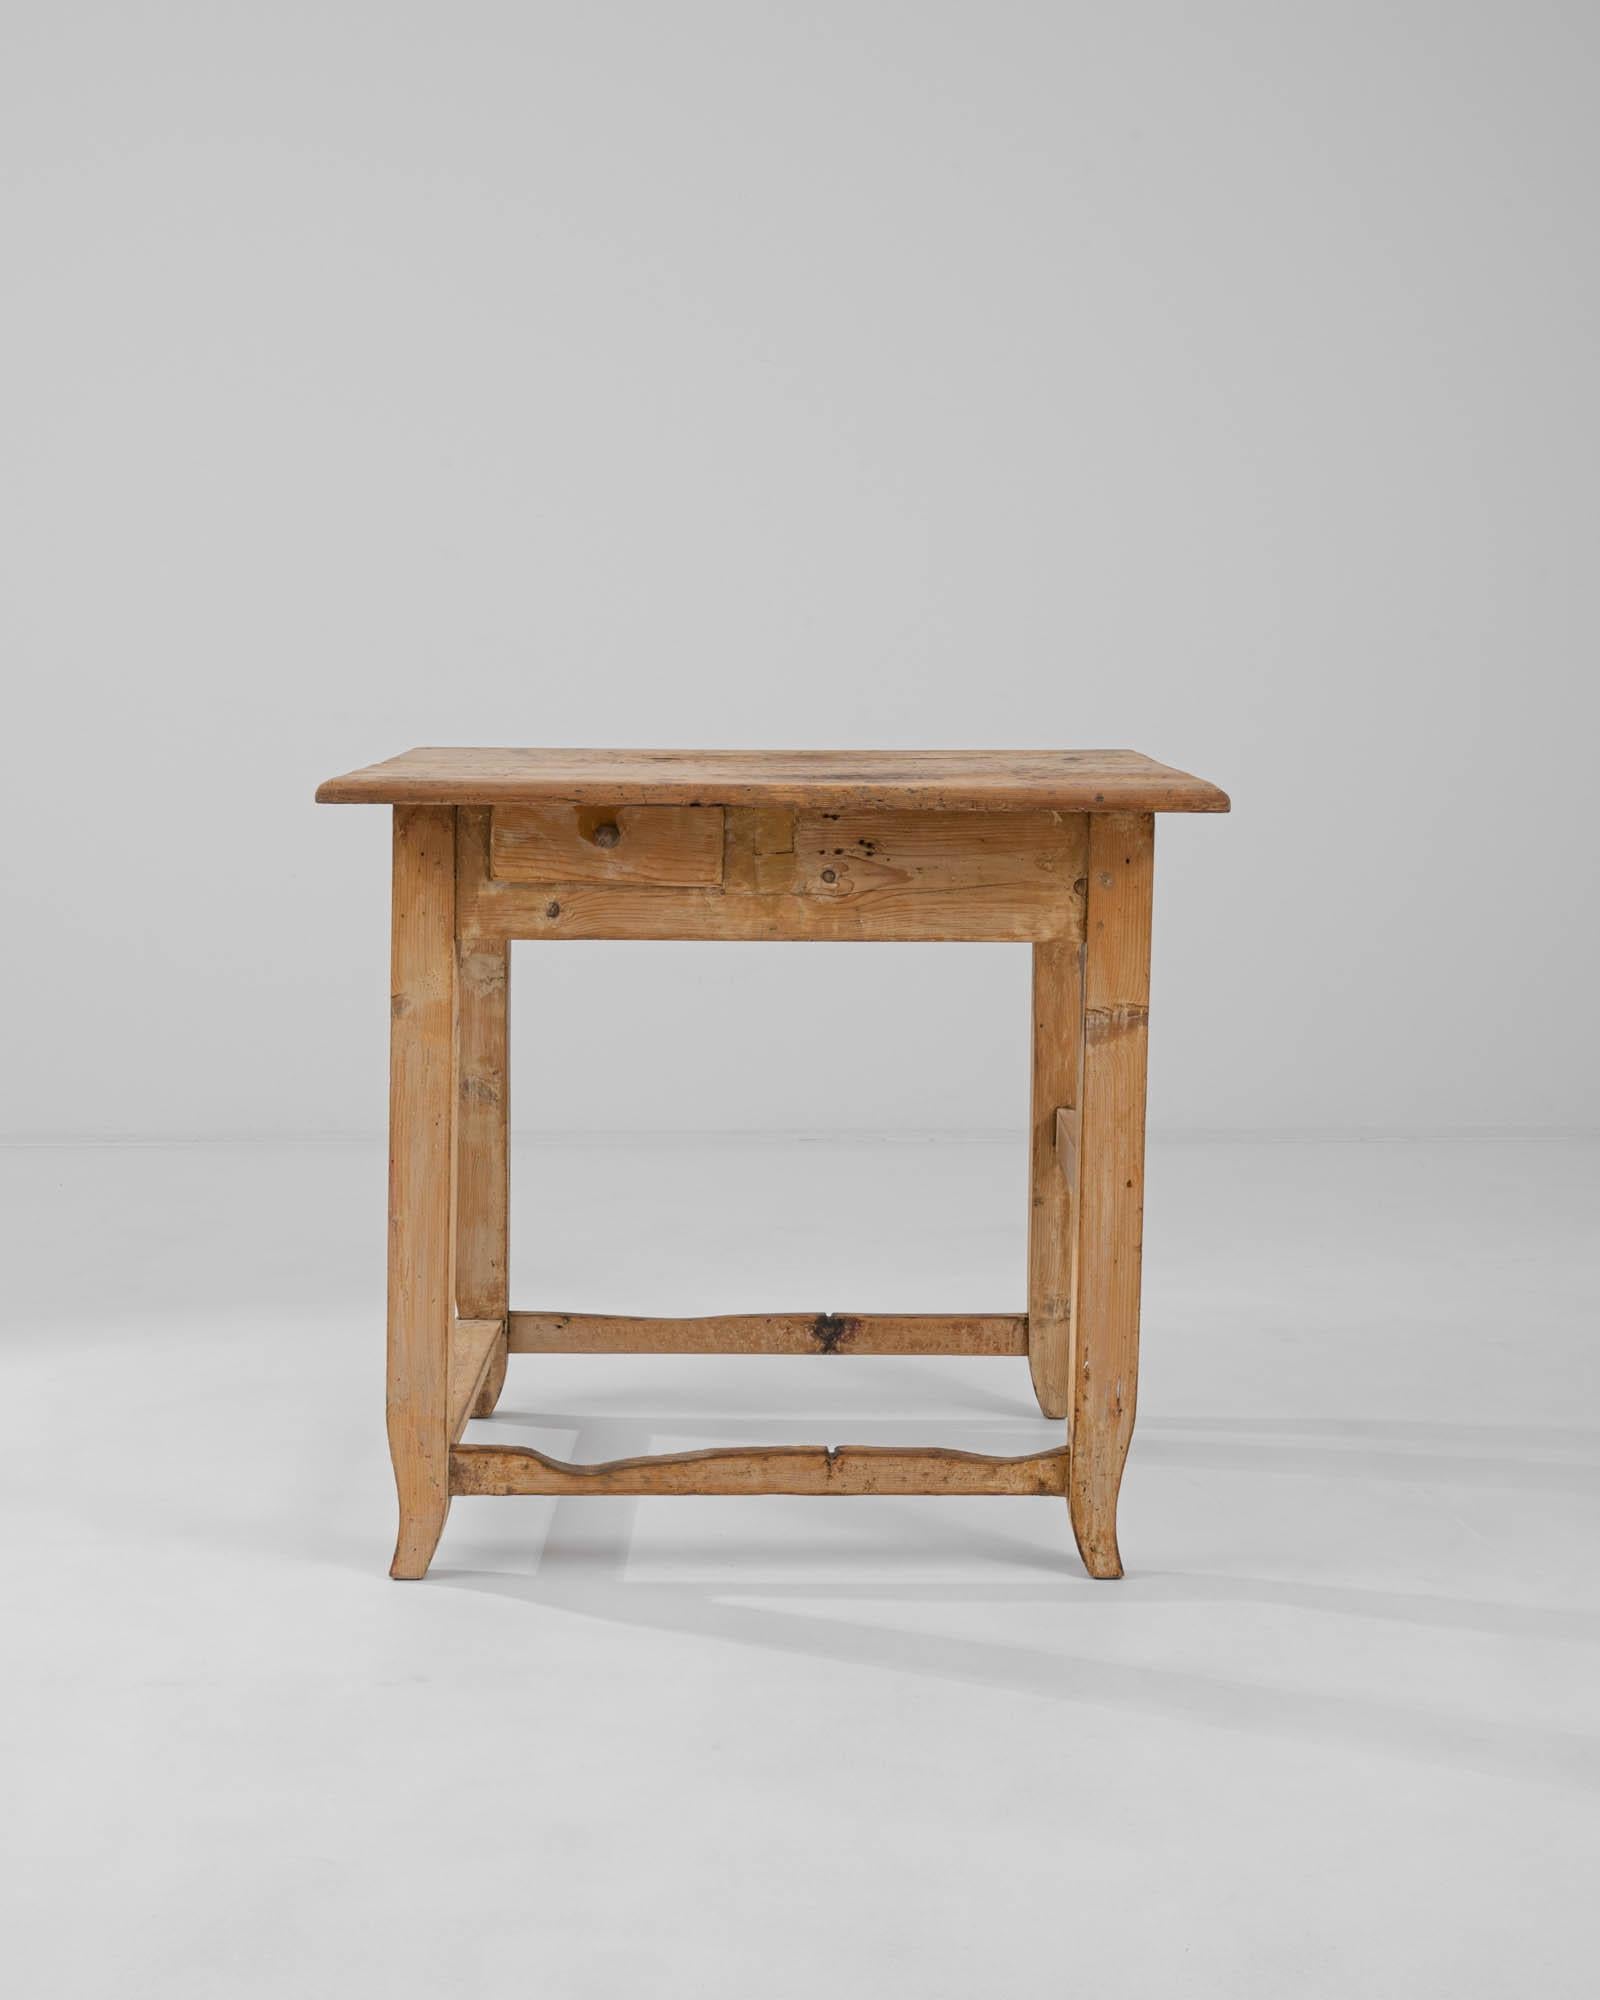 A wooden work table created in 19th century Central Europe. A puzzling piece, this table exerts a charming asymmetry, shining with refreshing and effortless individuality. With one stretcher raised higher than the other three, a playfully offset